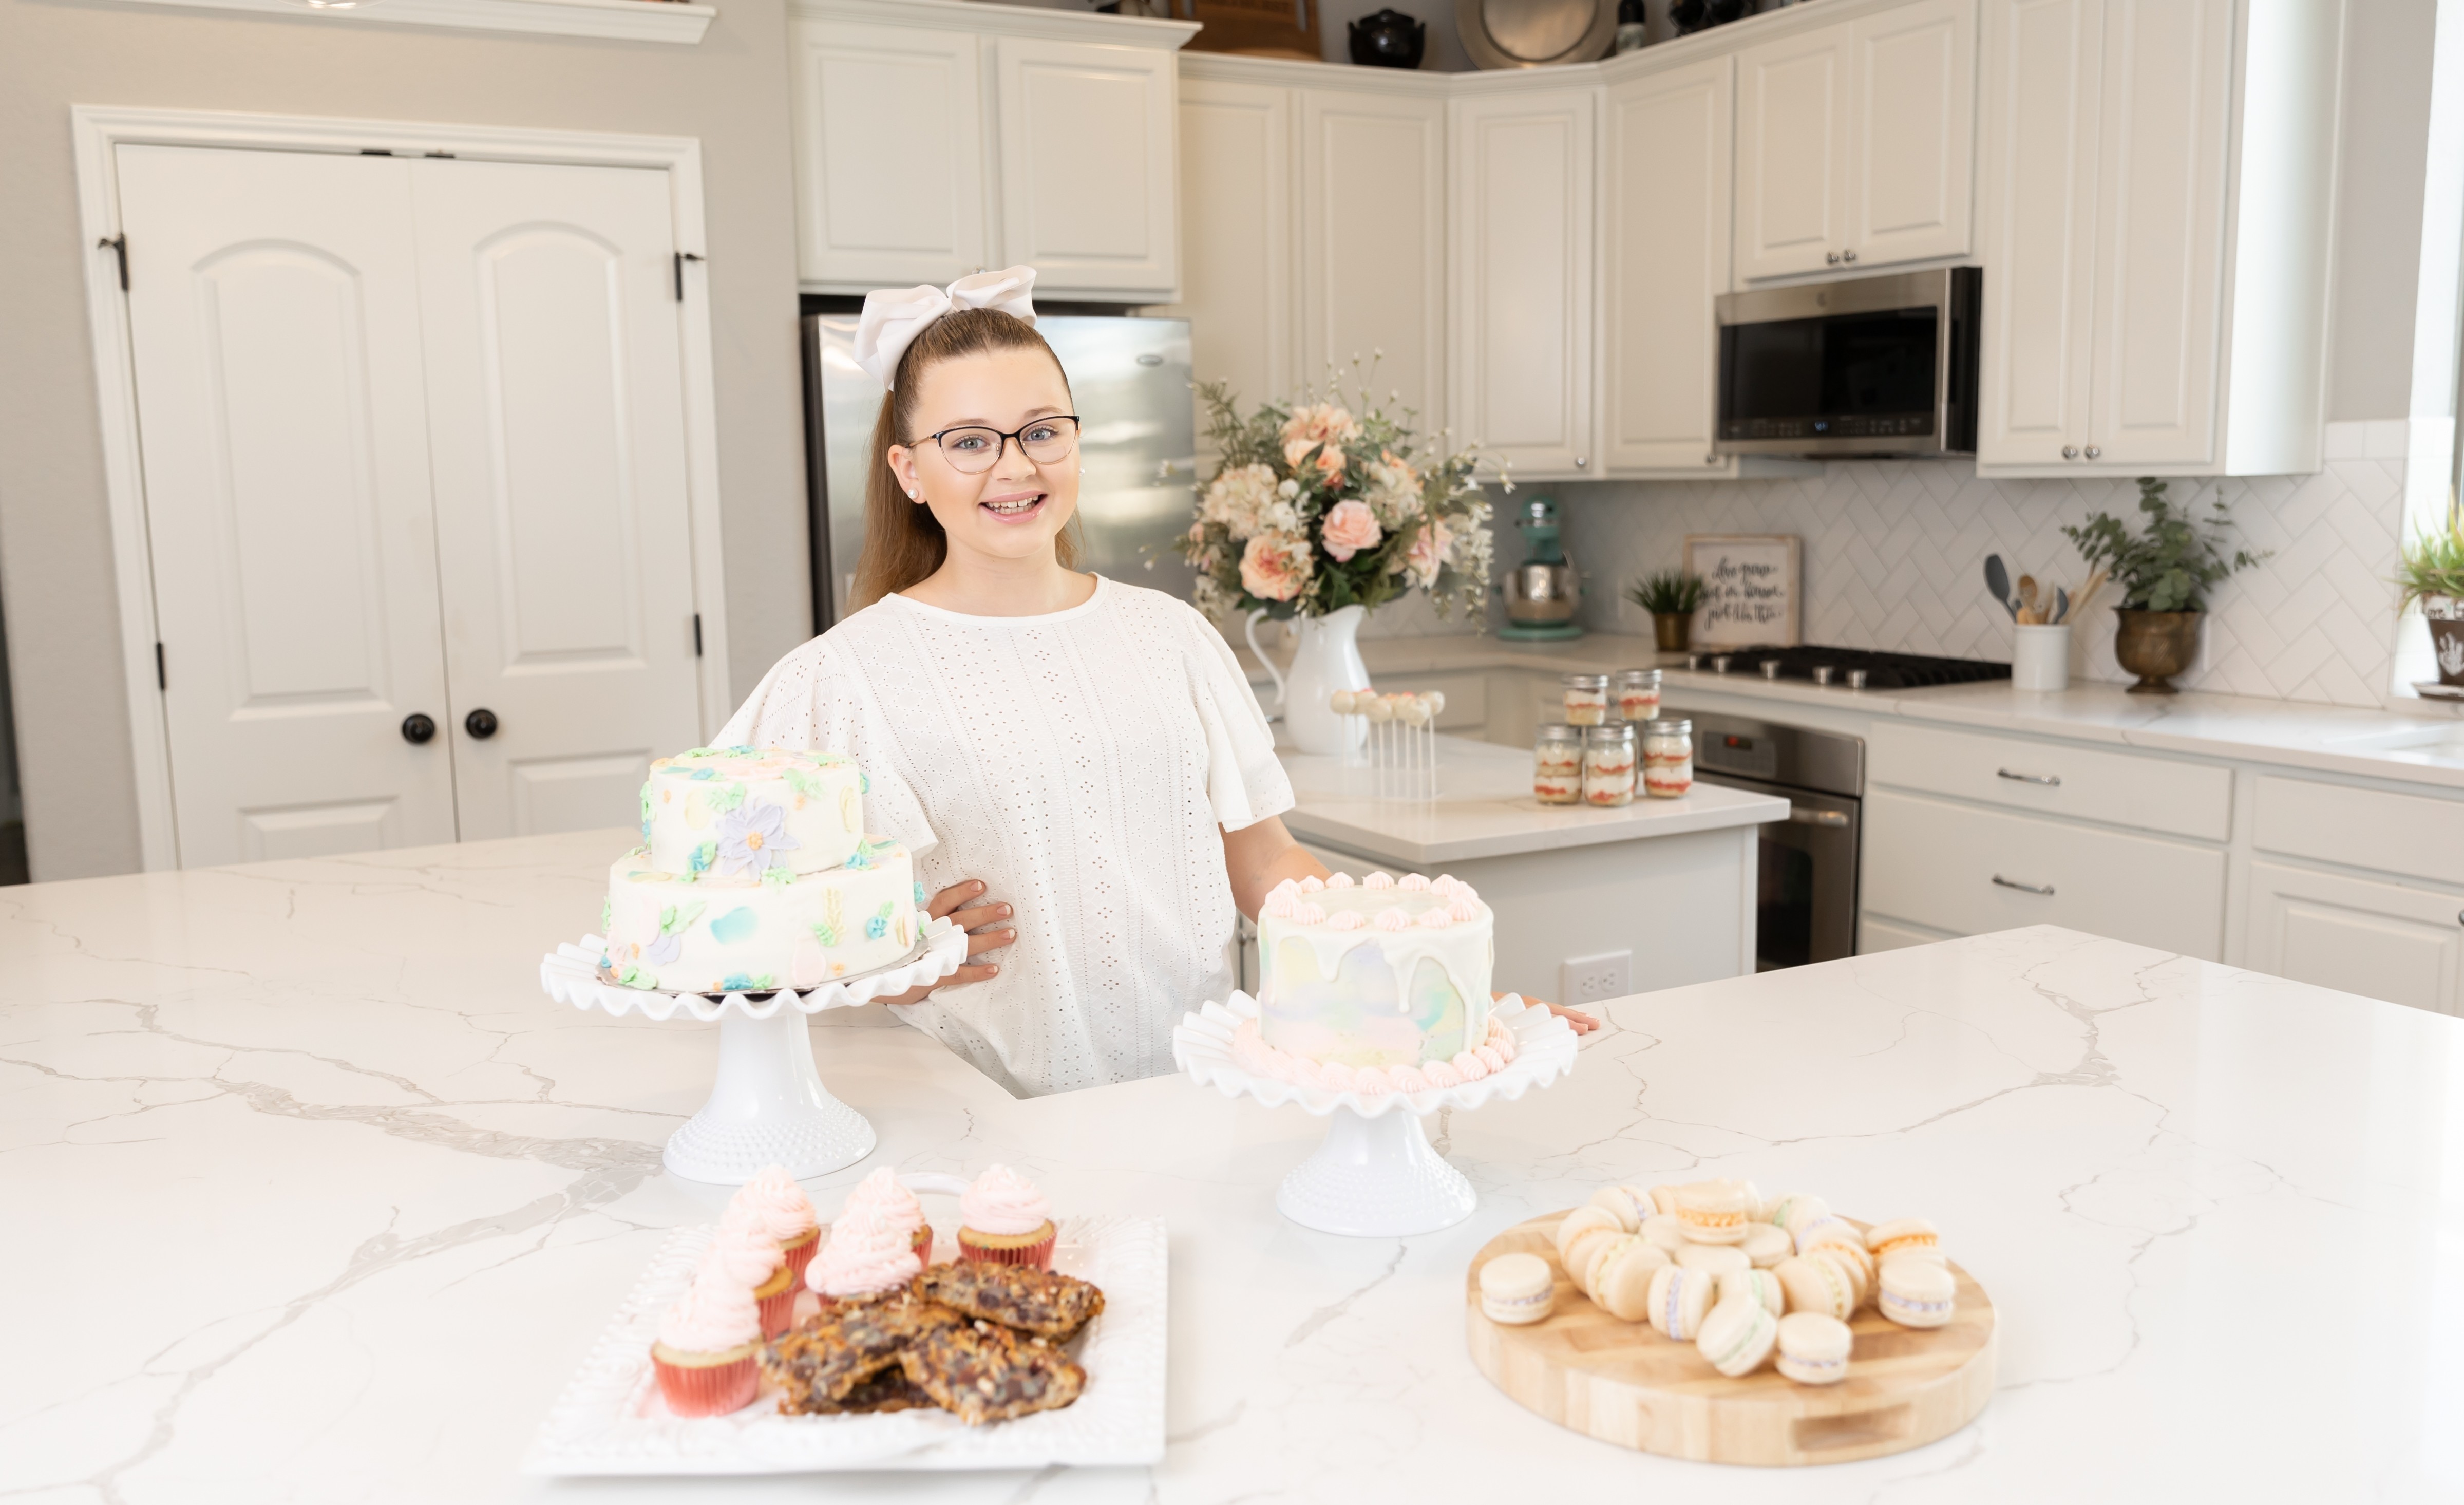 Girl in kitchen featuring baking goods